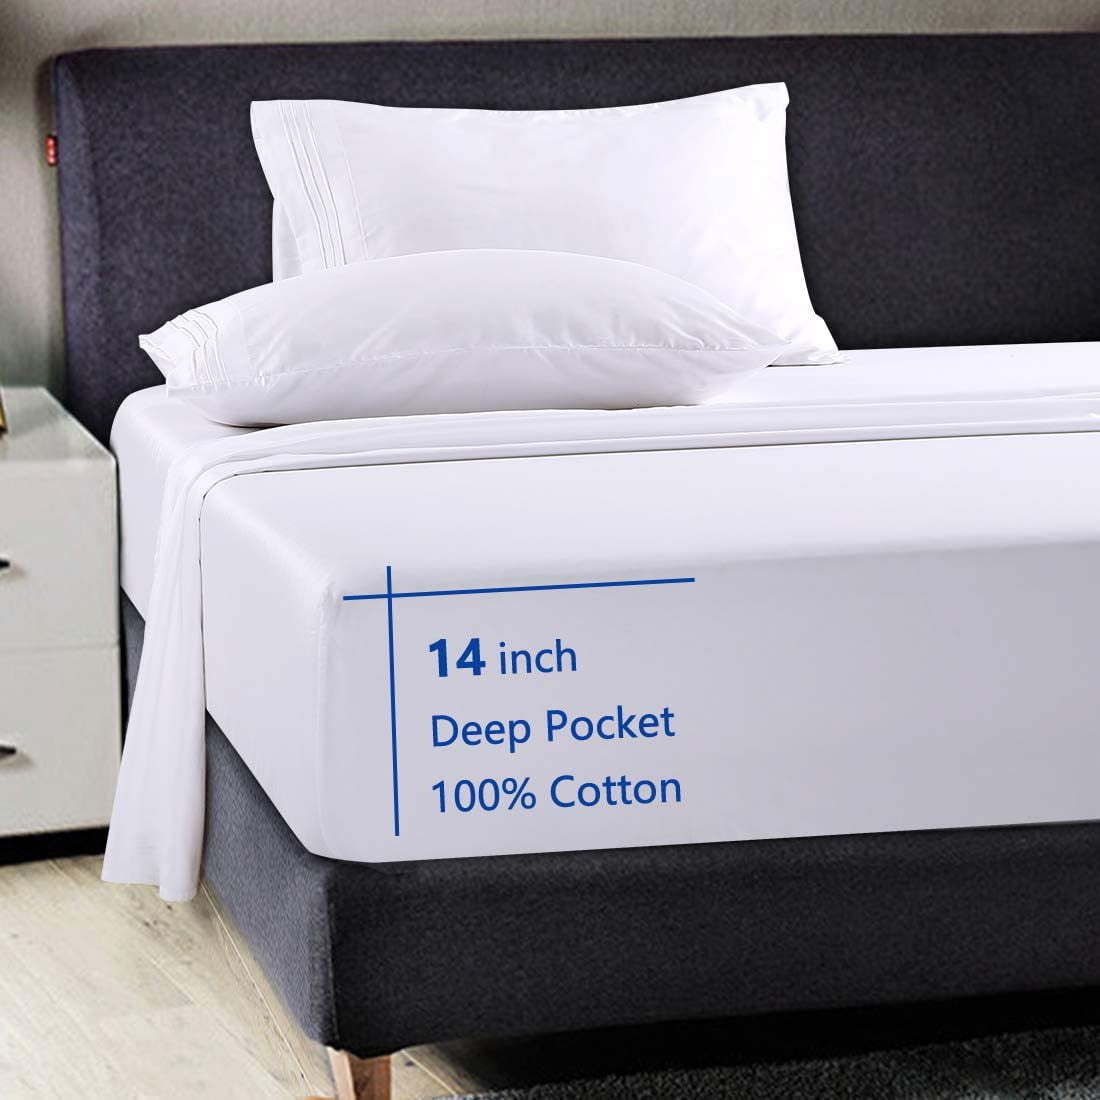 King Size All Bedding Item Premium Quality 100% Cotton 600 TC In 12 Color 